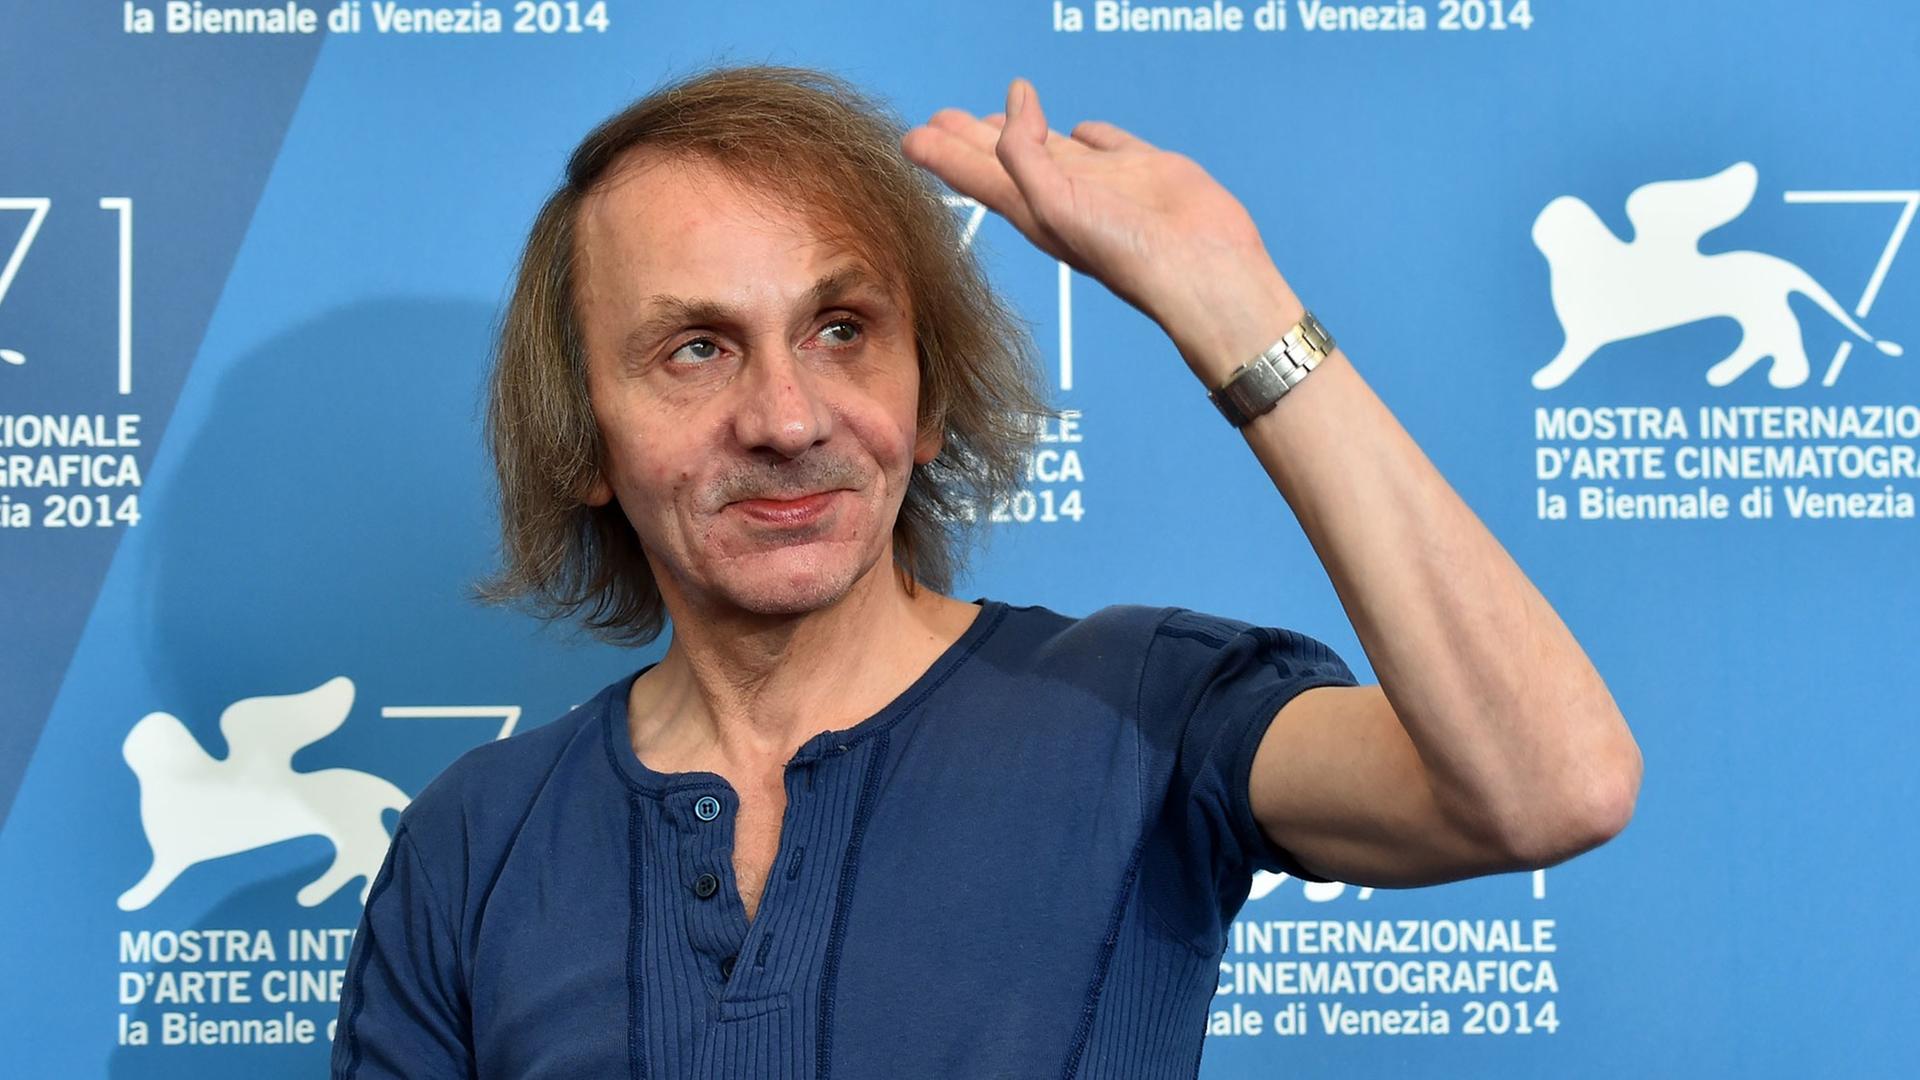 French writer Michel Houellebecq poses during the photocall of the movie "Near Death Experience" presented in the Orizzonti selection at the 71st Venice Film Festival on September 1st, 2014